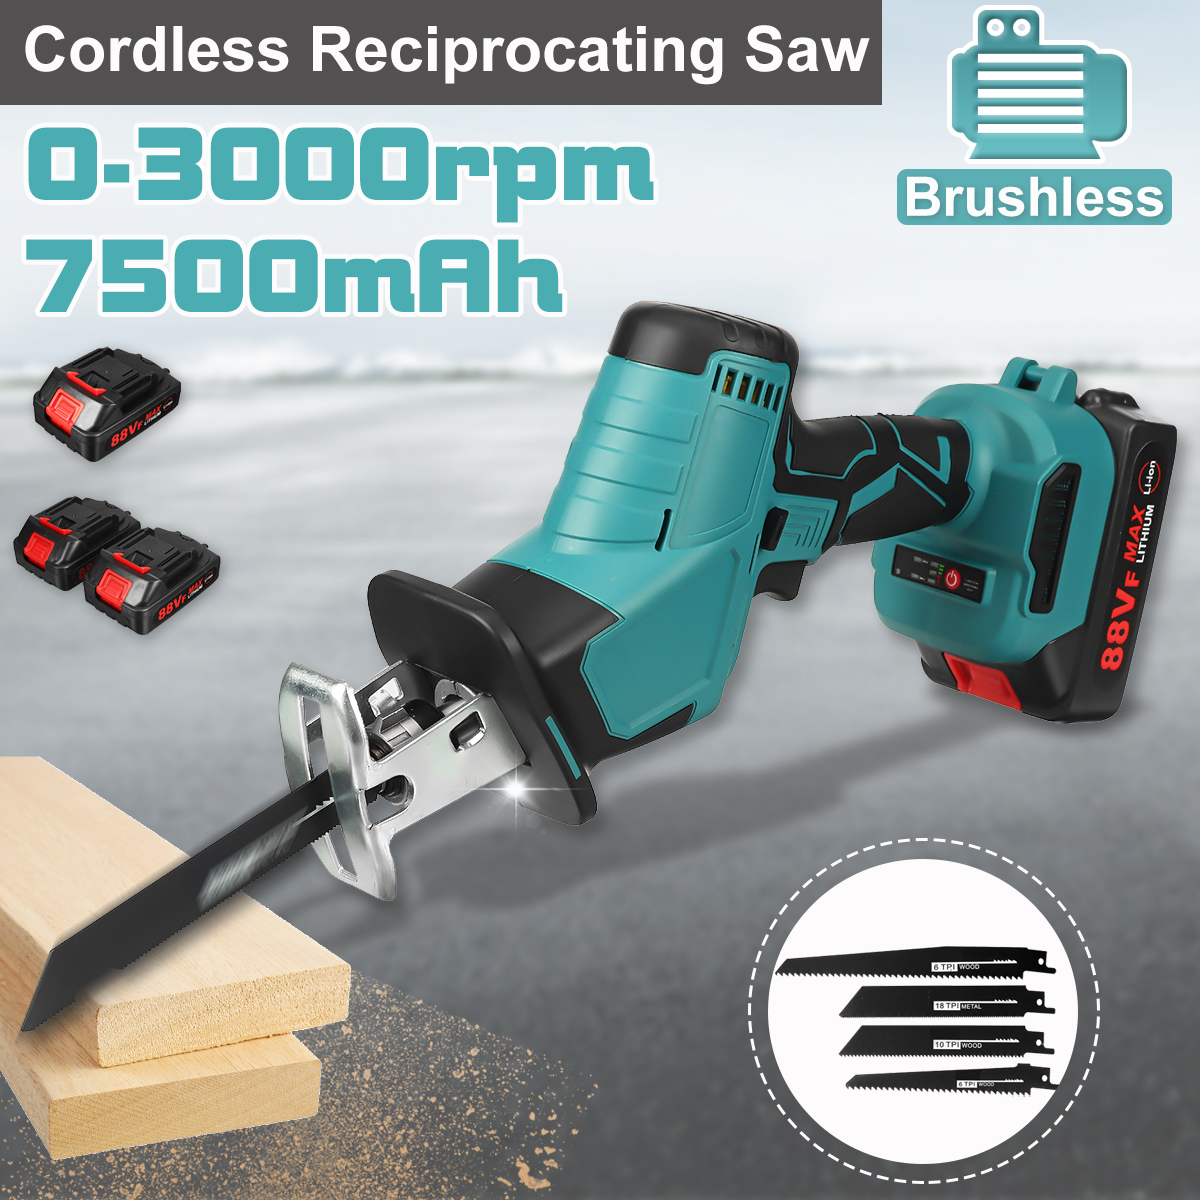 88VF-15mm-3000rpm-Portable-Electric-Cordless-Reciprocating-Saw-Pruning-Chain-Saw-Rechargeable-Woodwo-1918612-1